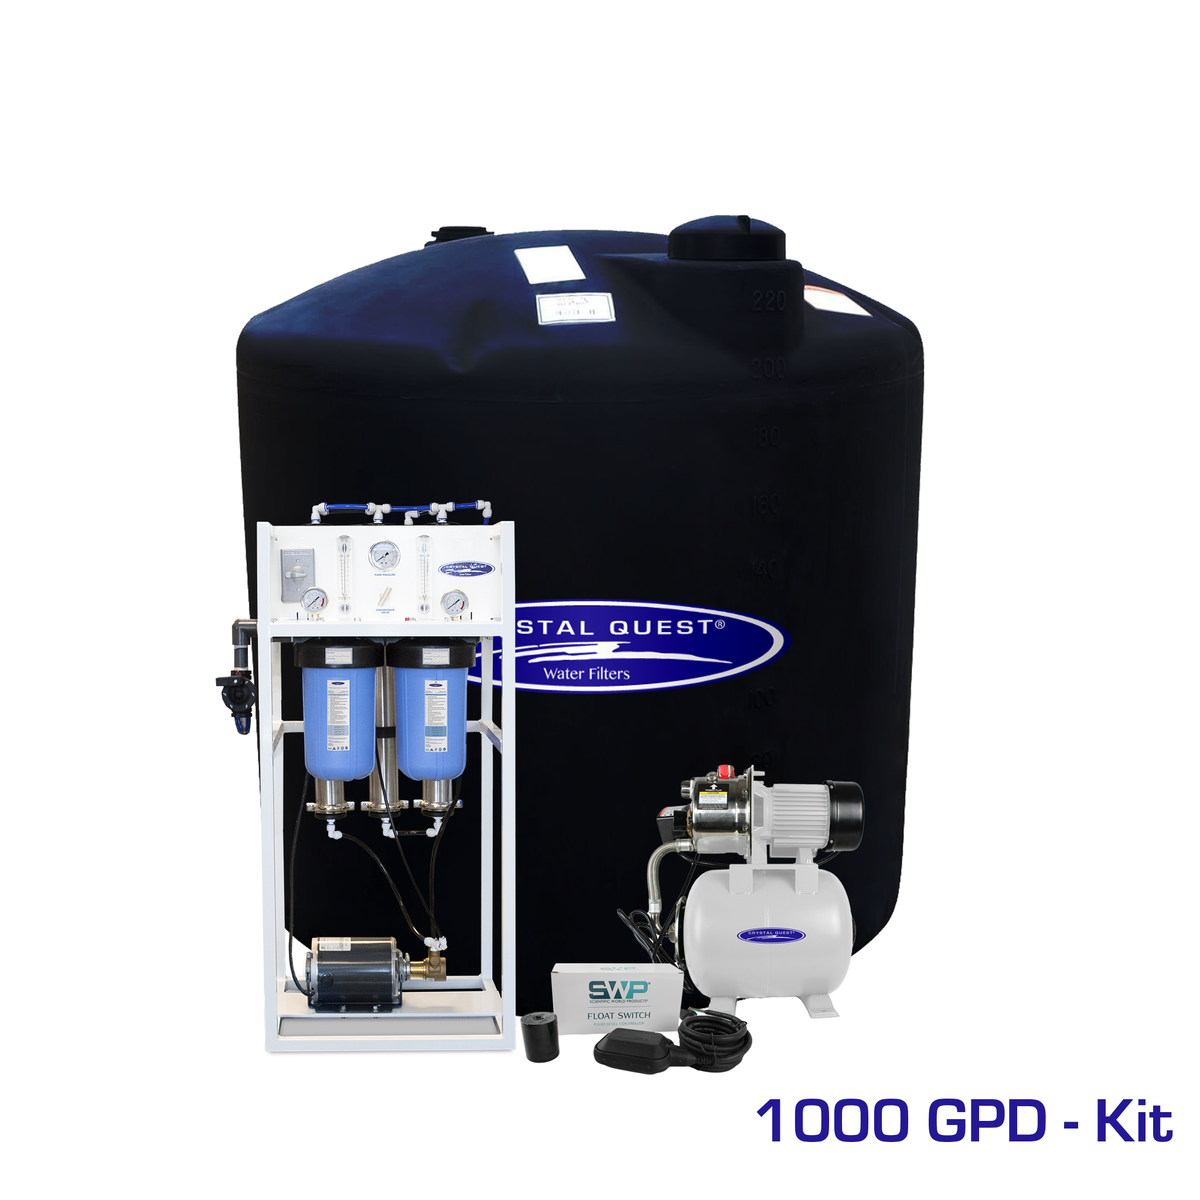 1,000 GPD / Add Storage Tank Kit (220 Gal) Commercial Mid-Flow Reverse Osmosis System (500-7000 GPD) - Commercial - Crystal Quest